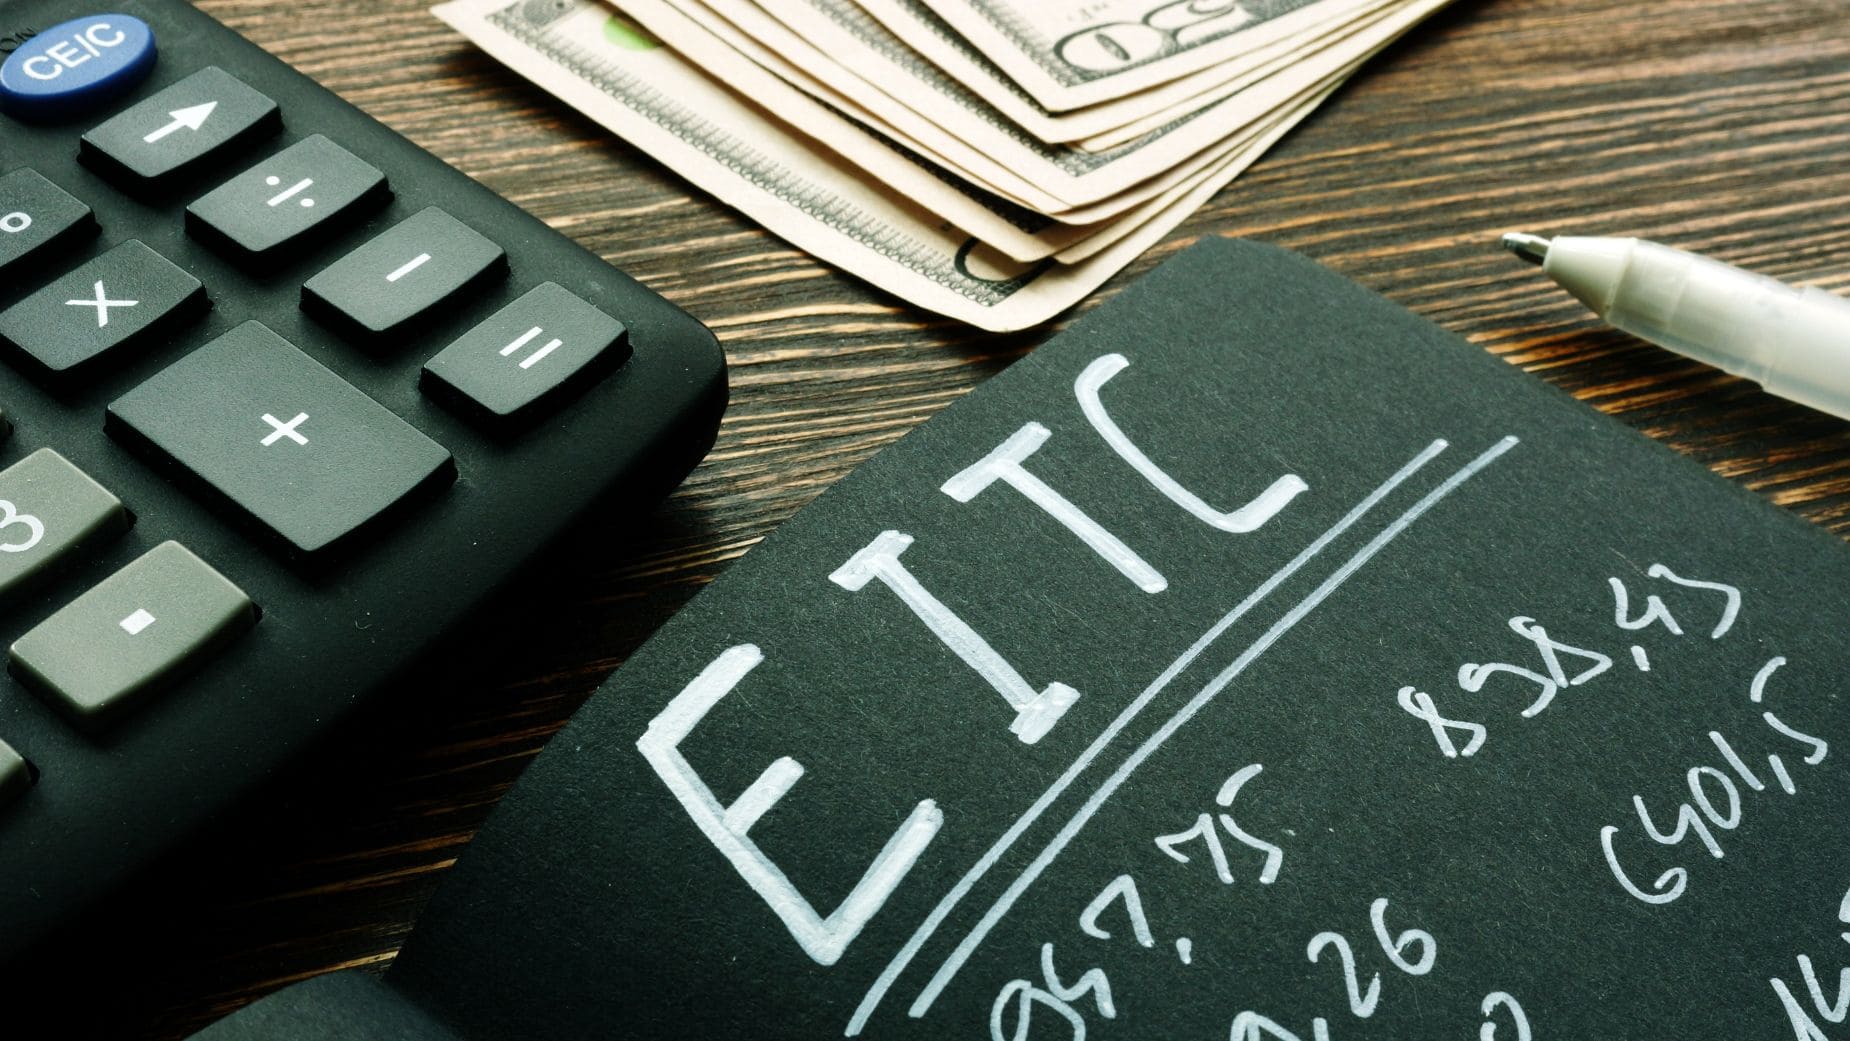 Americans could get more than 7,000 dollars thanks to the EITC